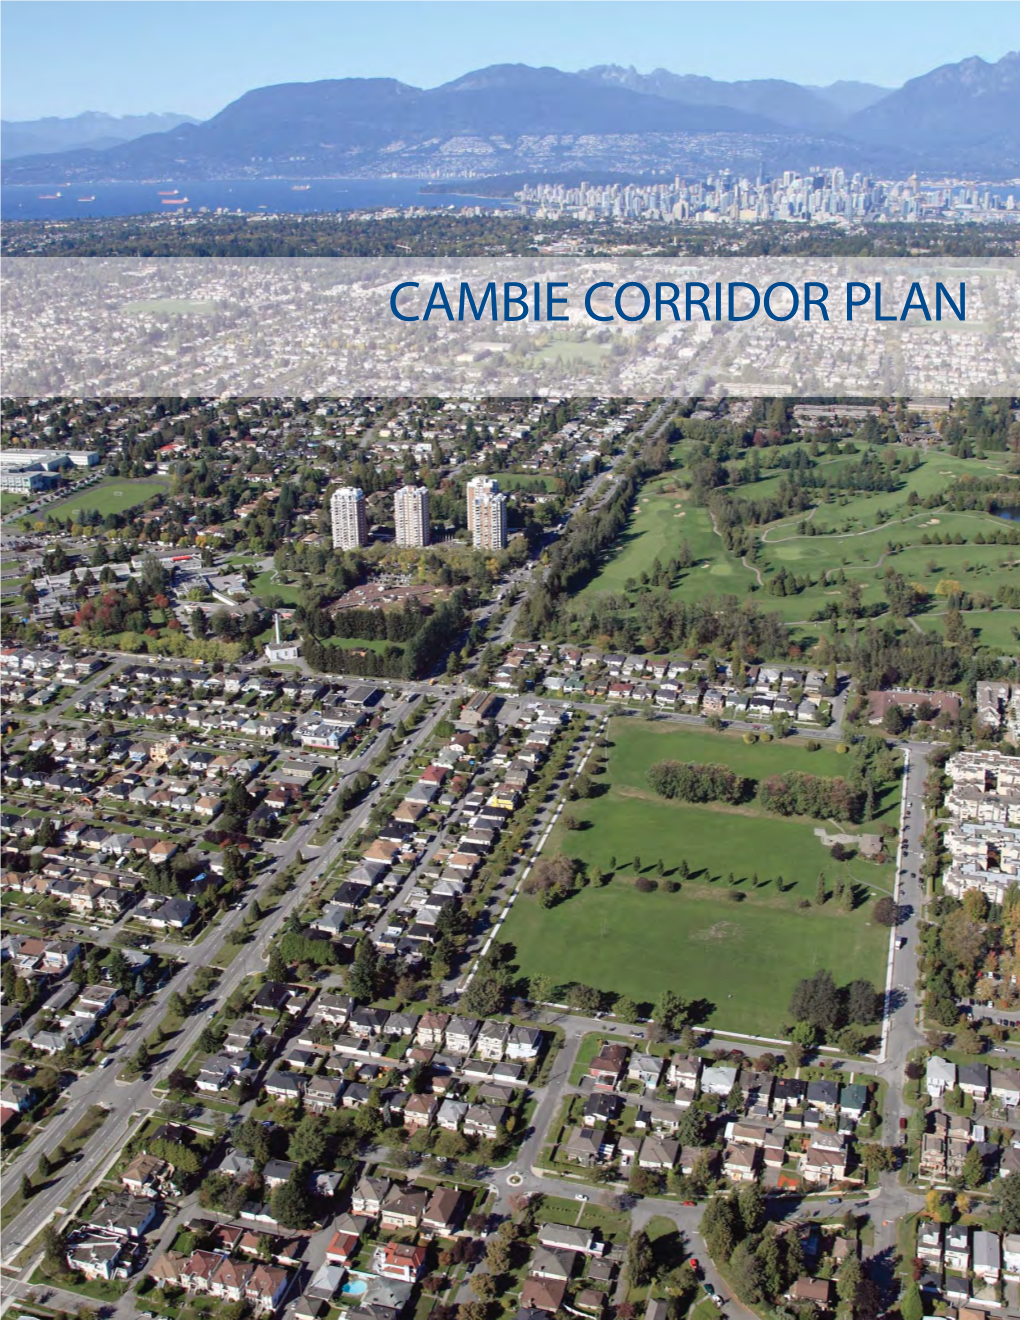 CAMBIE CORRIDOR PLAN This Plan Was Approved by Vancouver City Council on May 9, 2011